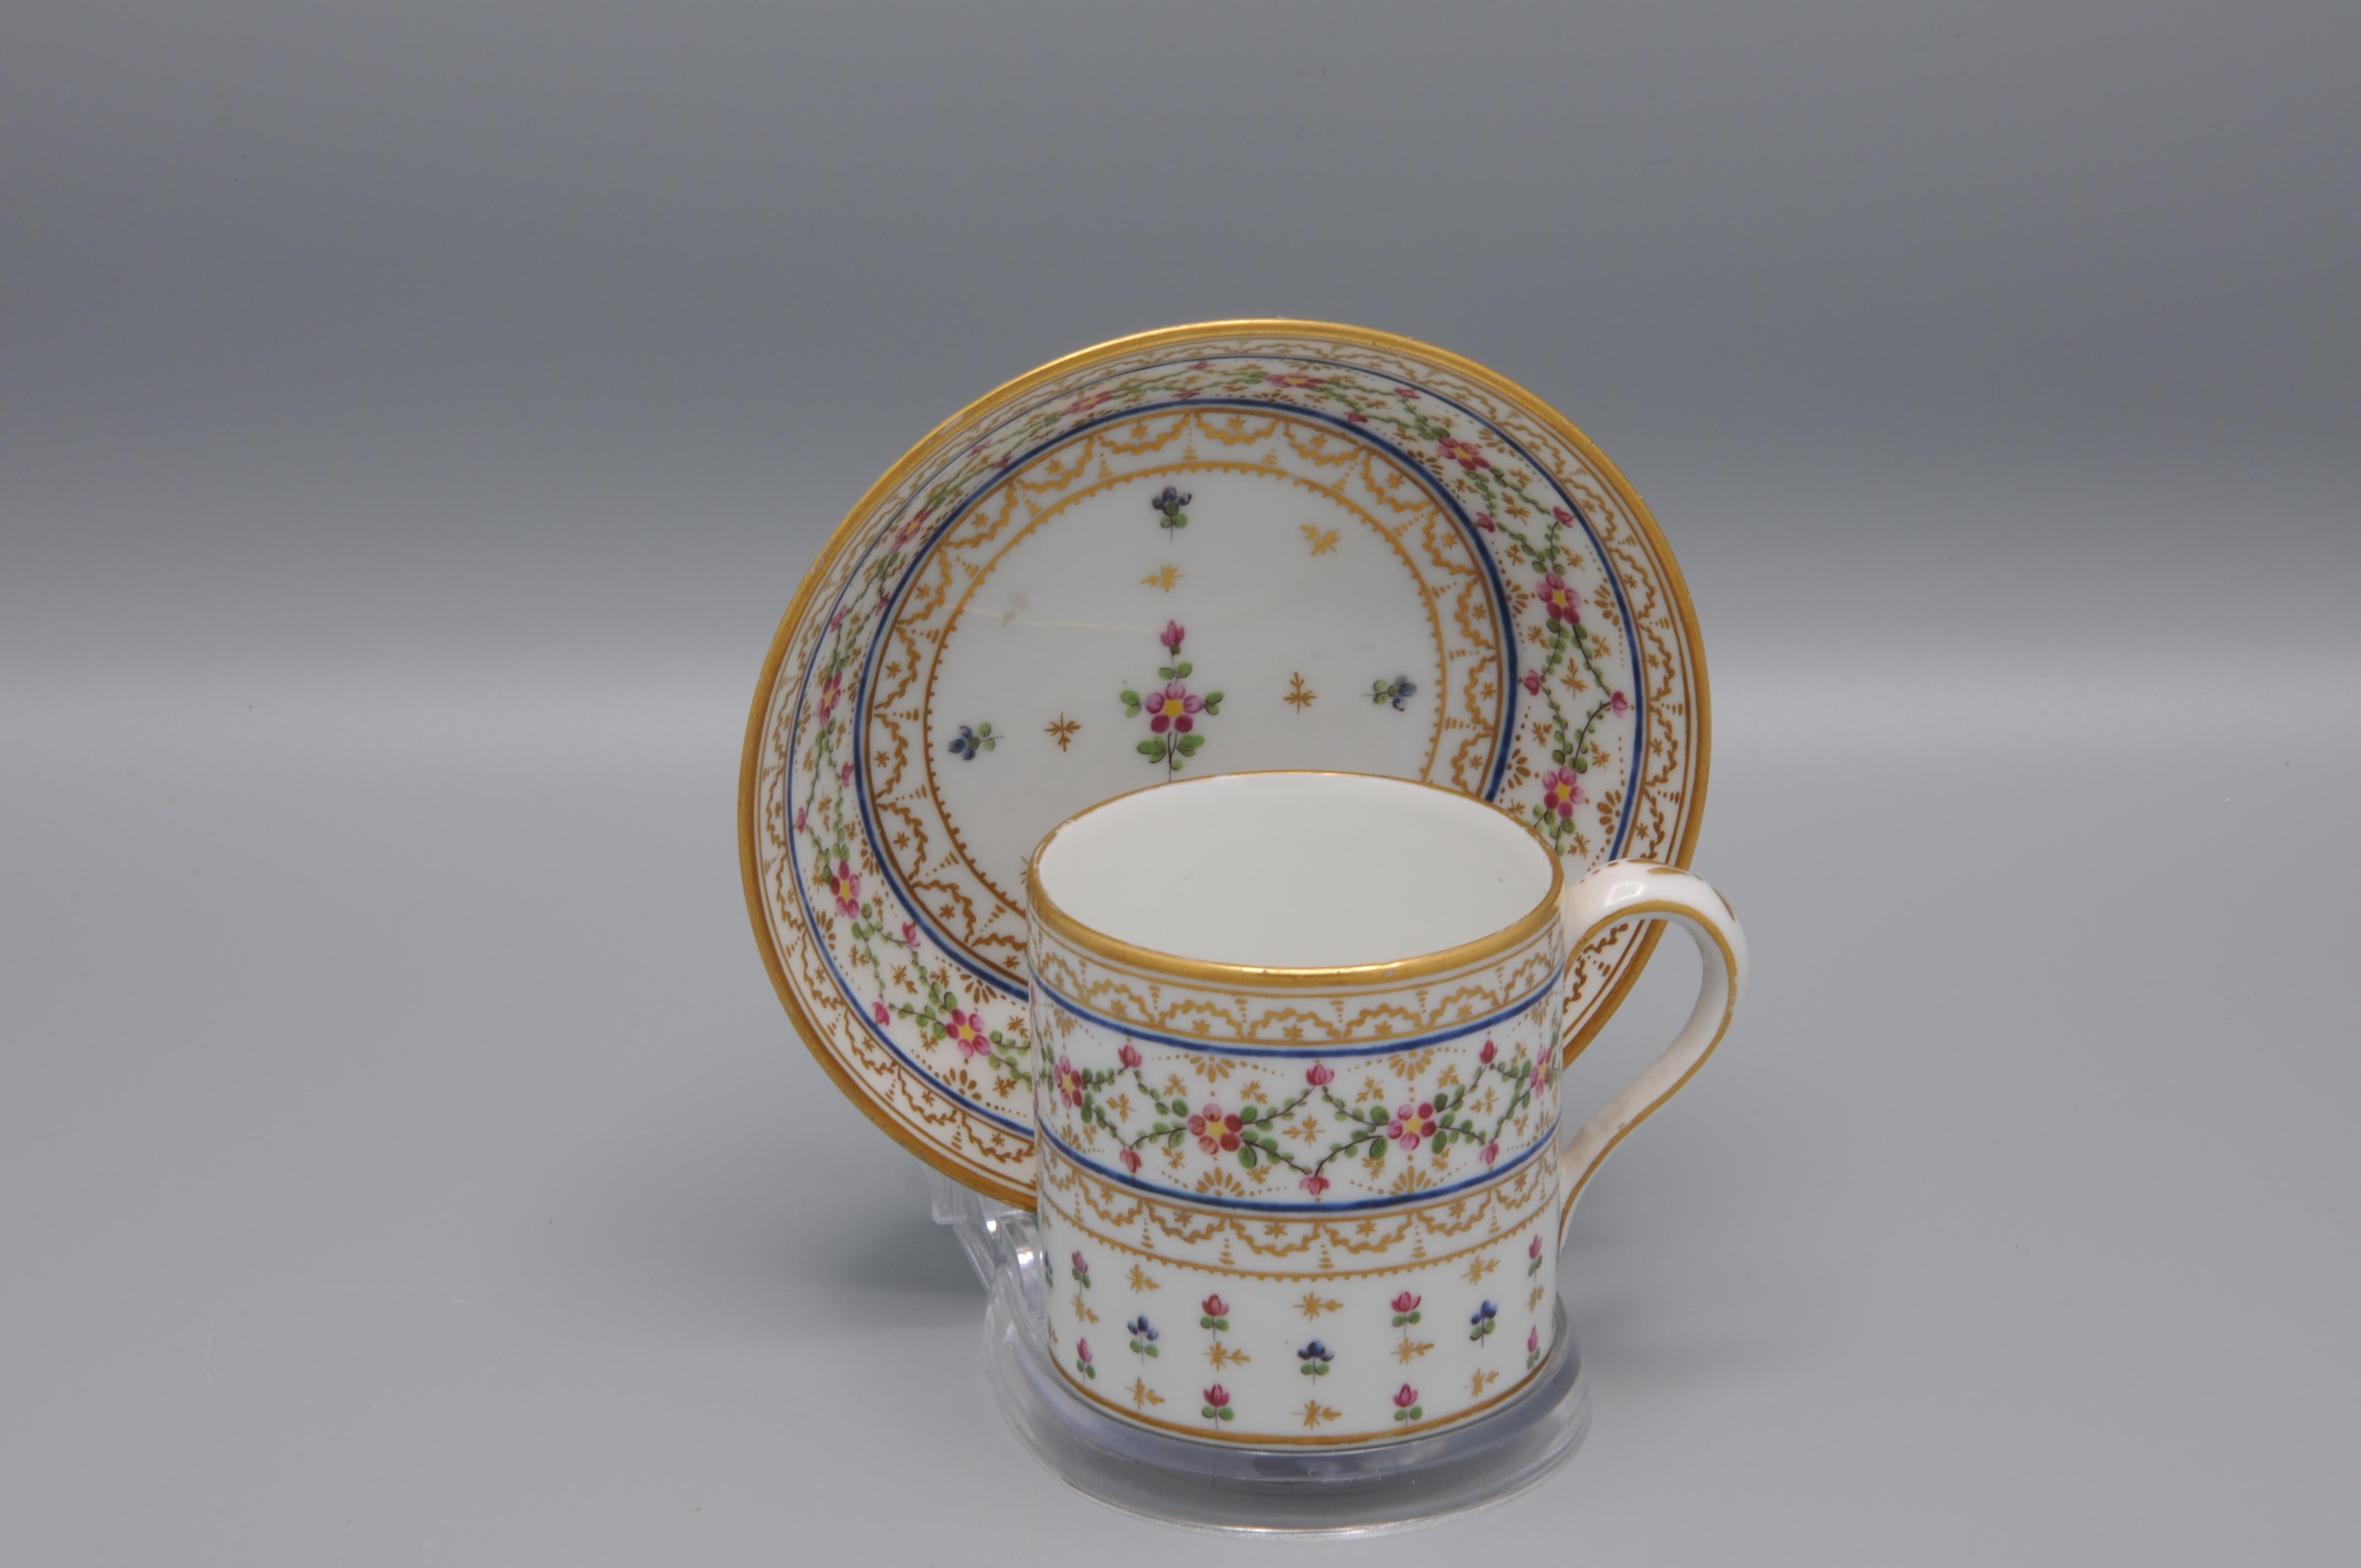 Very beautiful cup and saucer of the model Litron, by Manufacture à la Reine rue Thiroux.
ca 1785-1790.
Refined and elaborate decoration of flower festoons and gilt ornament.
Faint crowned A mark to the underside. 

The manufacture was founded by